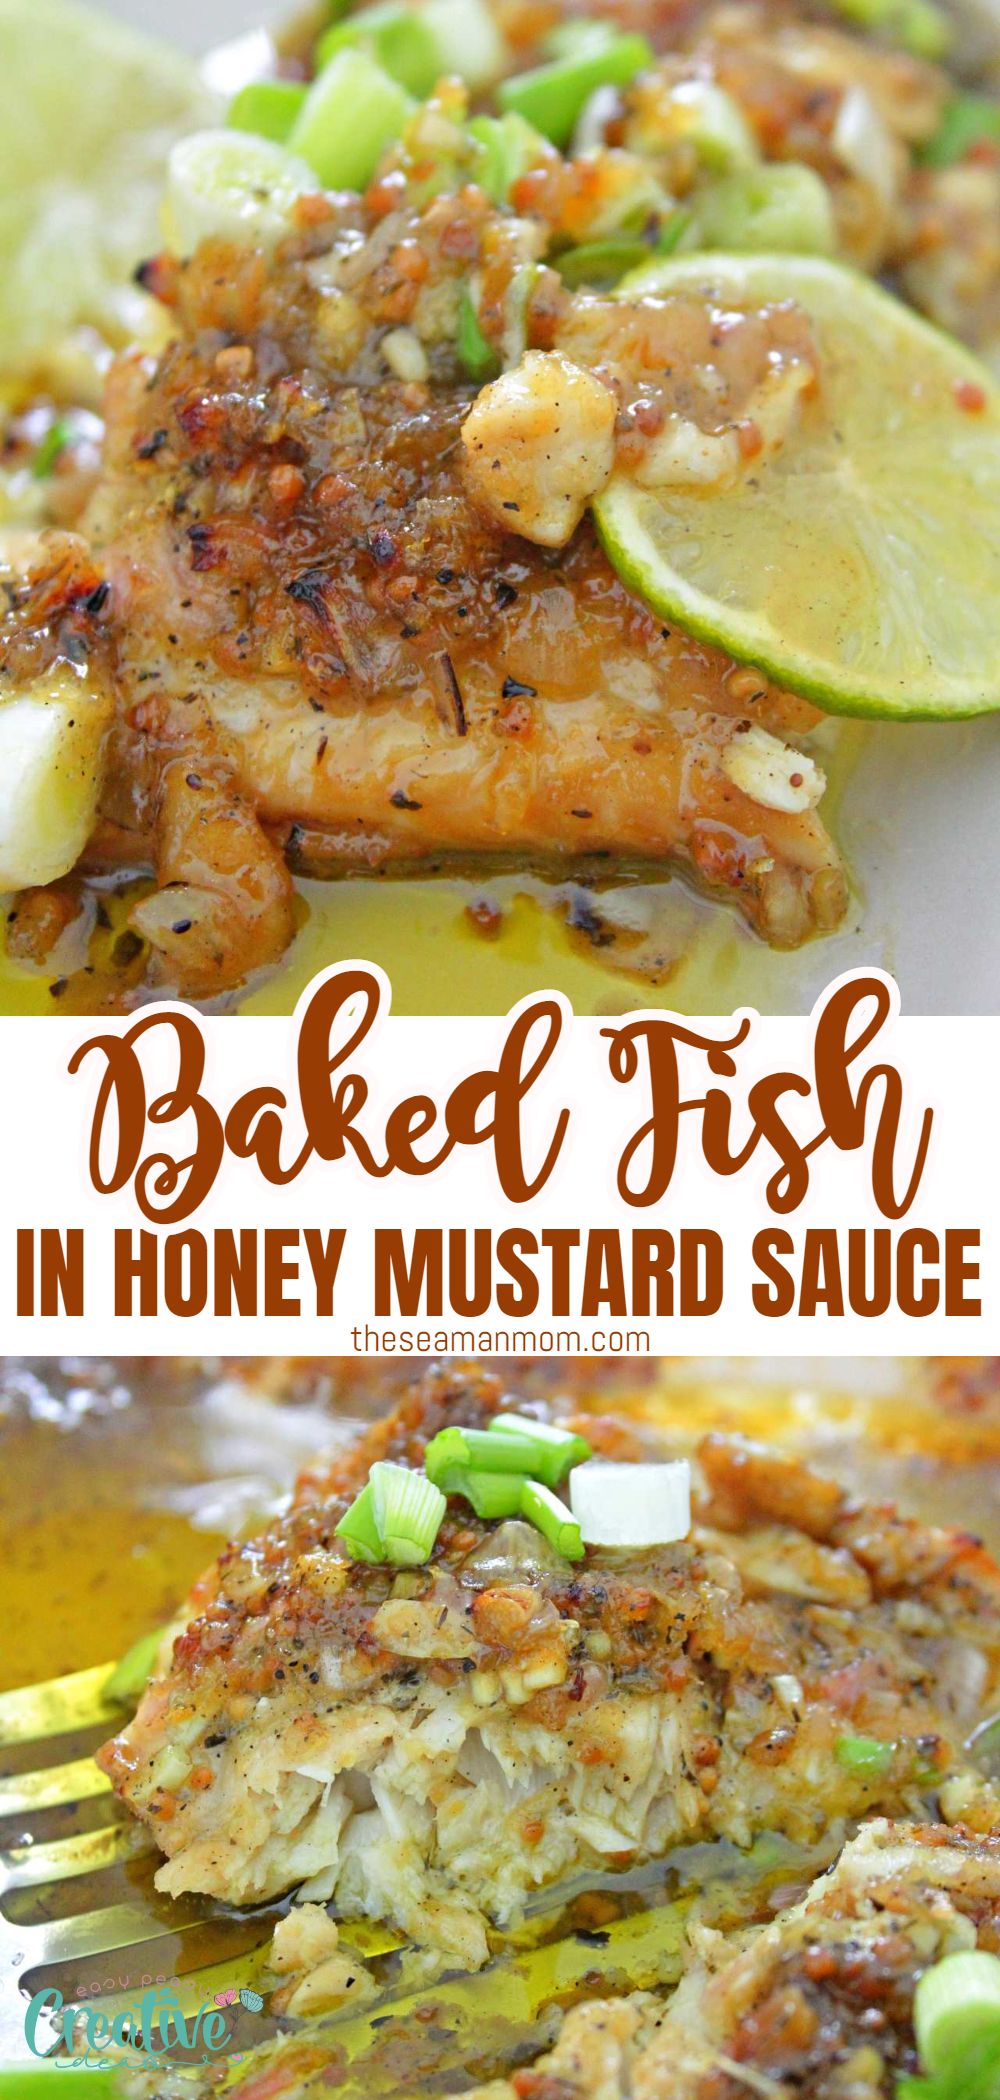 This honey mustard fish recipe is perfect for a quick and easy weeknight meal! The sauce is made with ingredients you probably already have in your kitchen, so it’s simple and convenient. The fish is coated in a delicious honey mustard sauce that will leave your taste buds wanting more. Plus, this dish is healthy and low-carb, so you can feel good about eating it. via @petroneagu